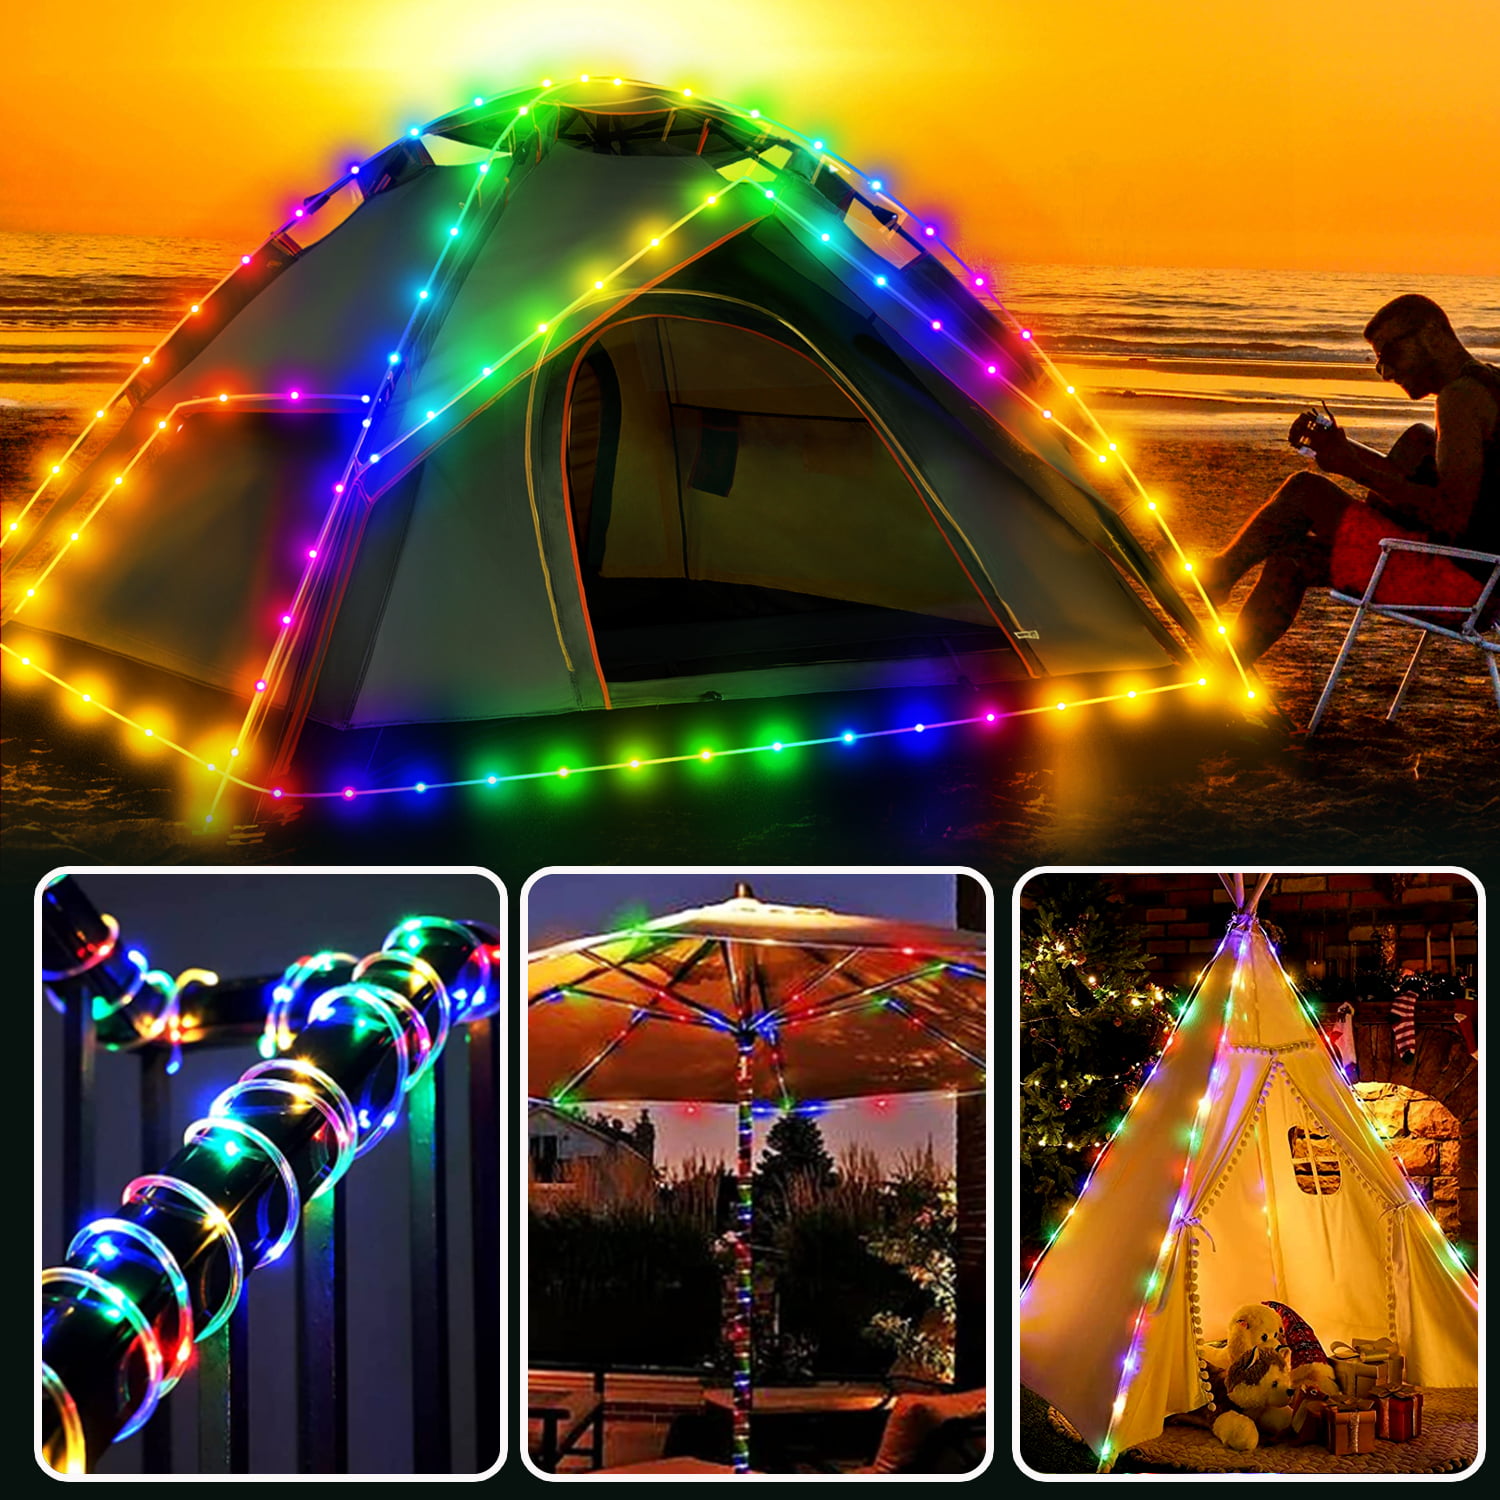 TENT STRING LIGHTS Camping Light with Remote Control 17 Colors